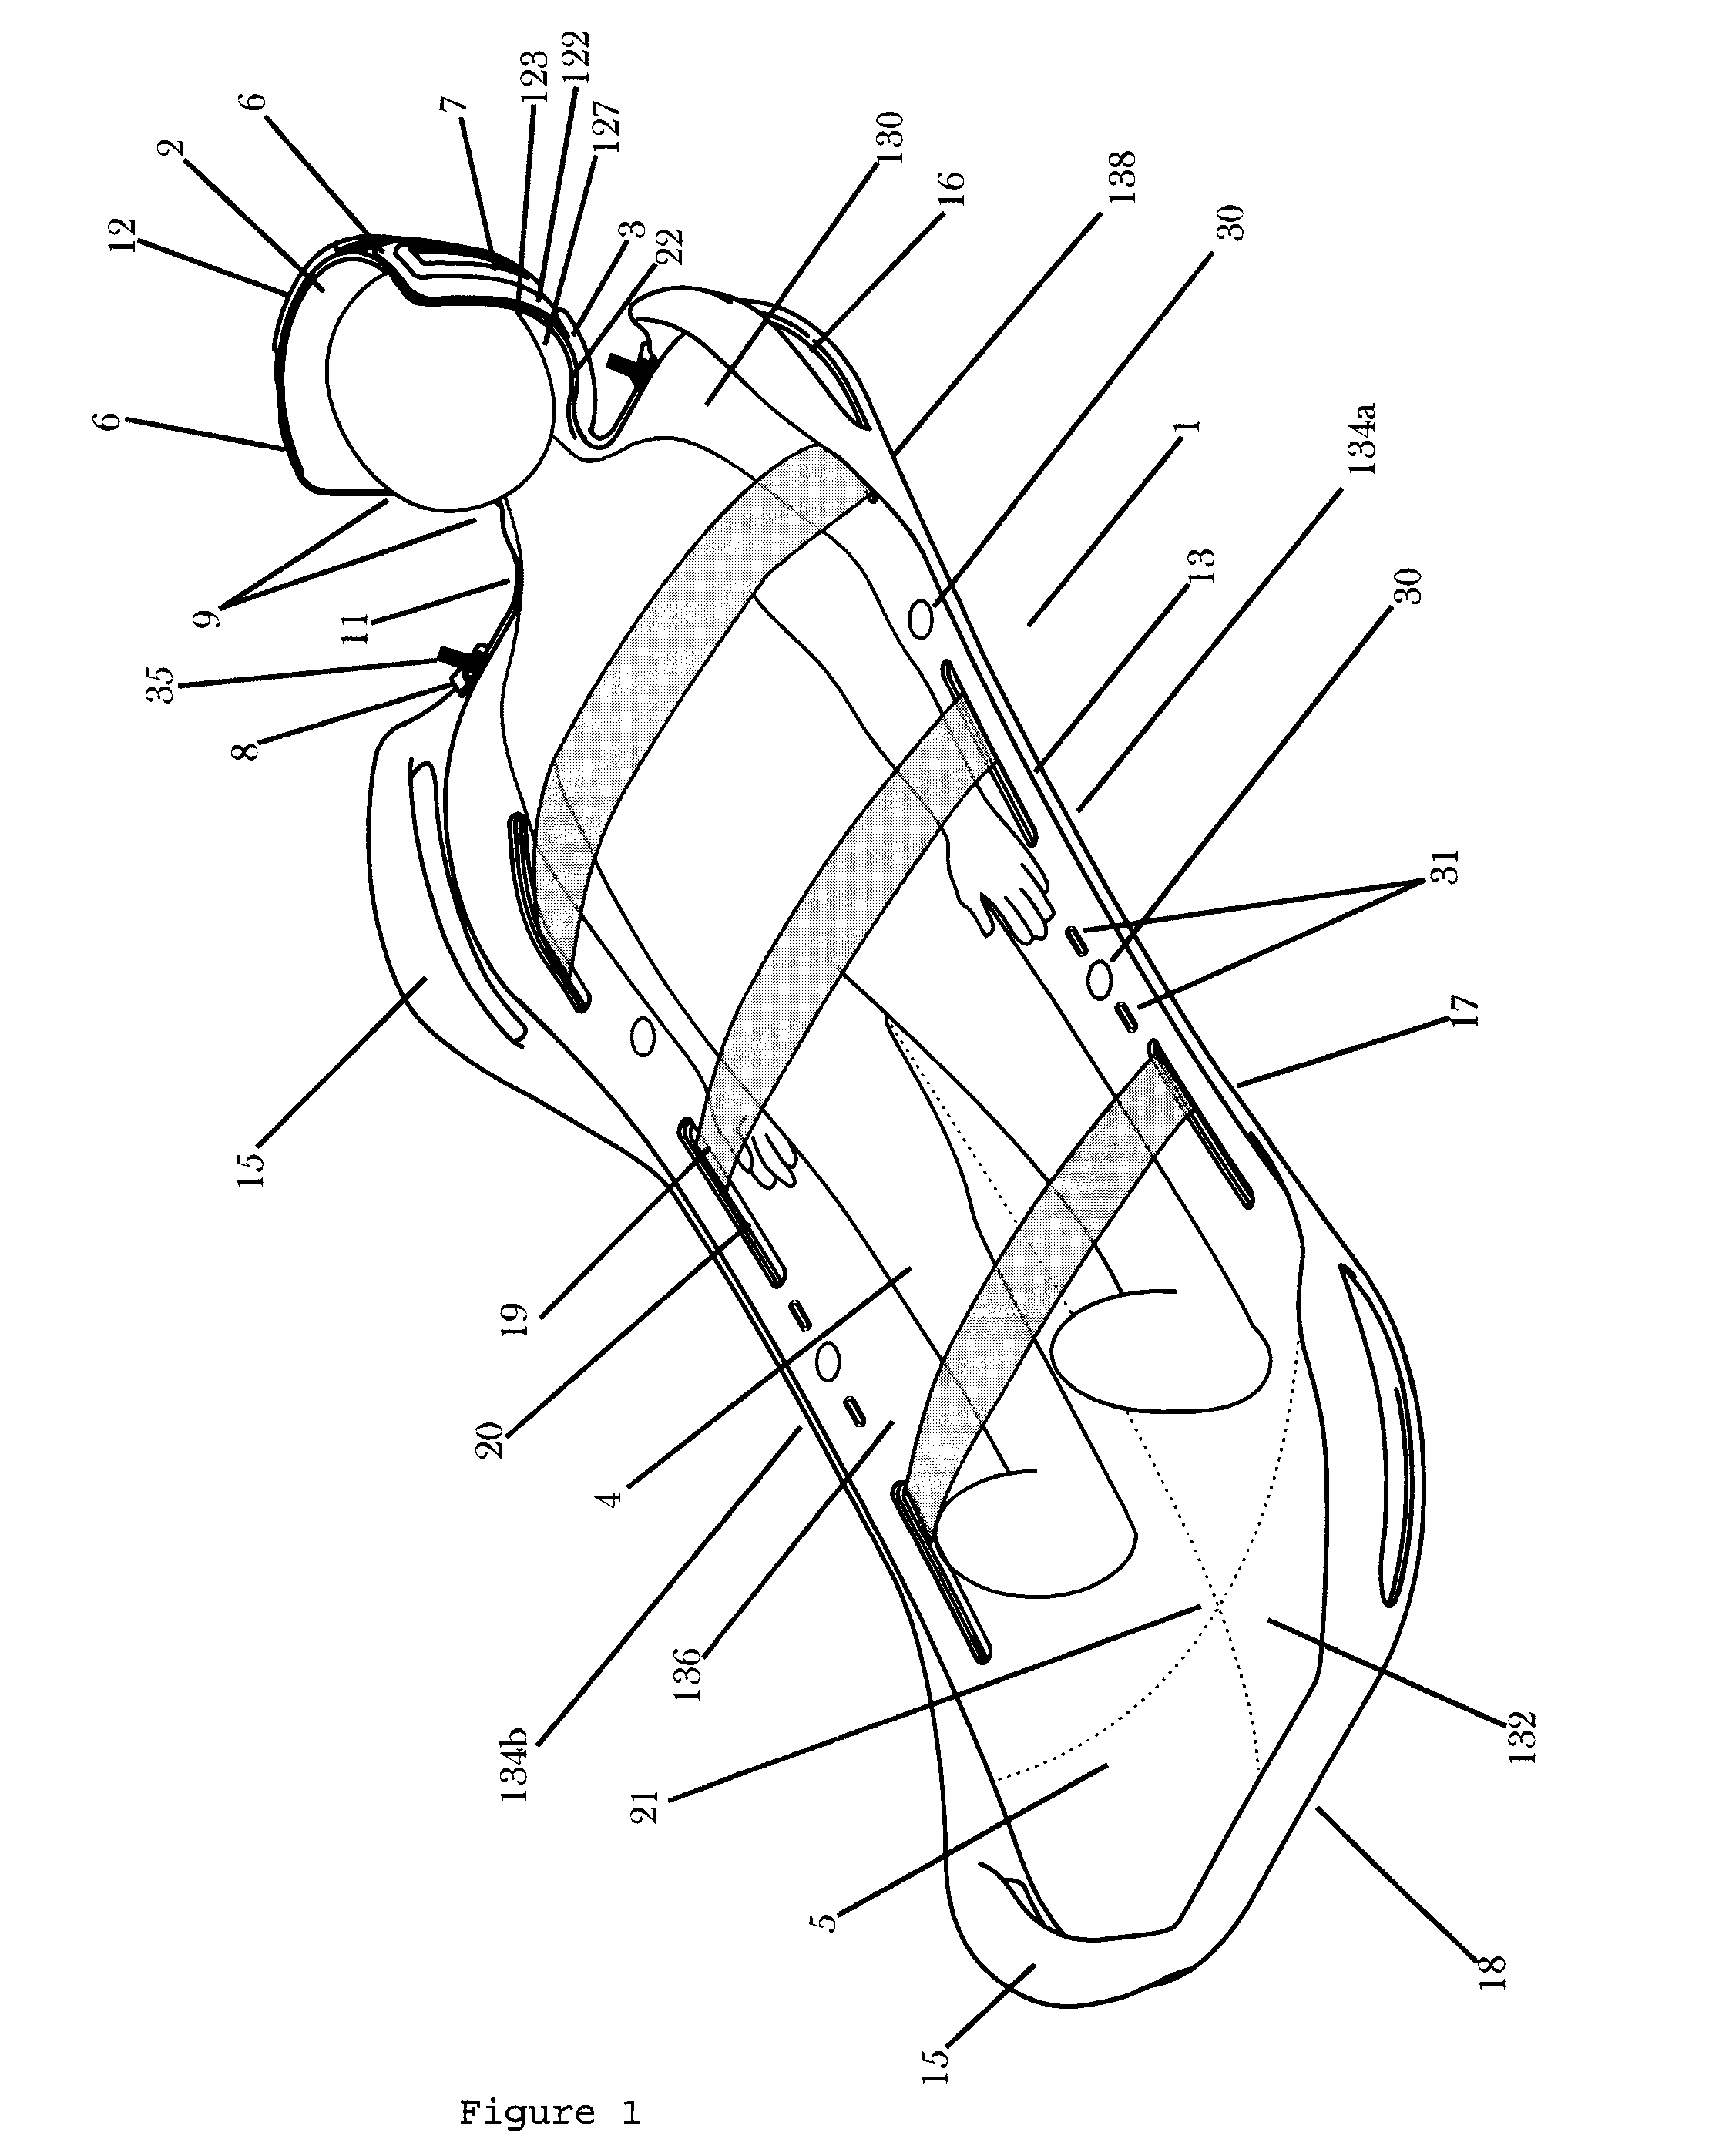 Subject placement and head positioning device